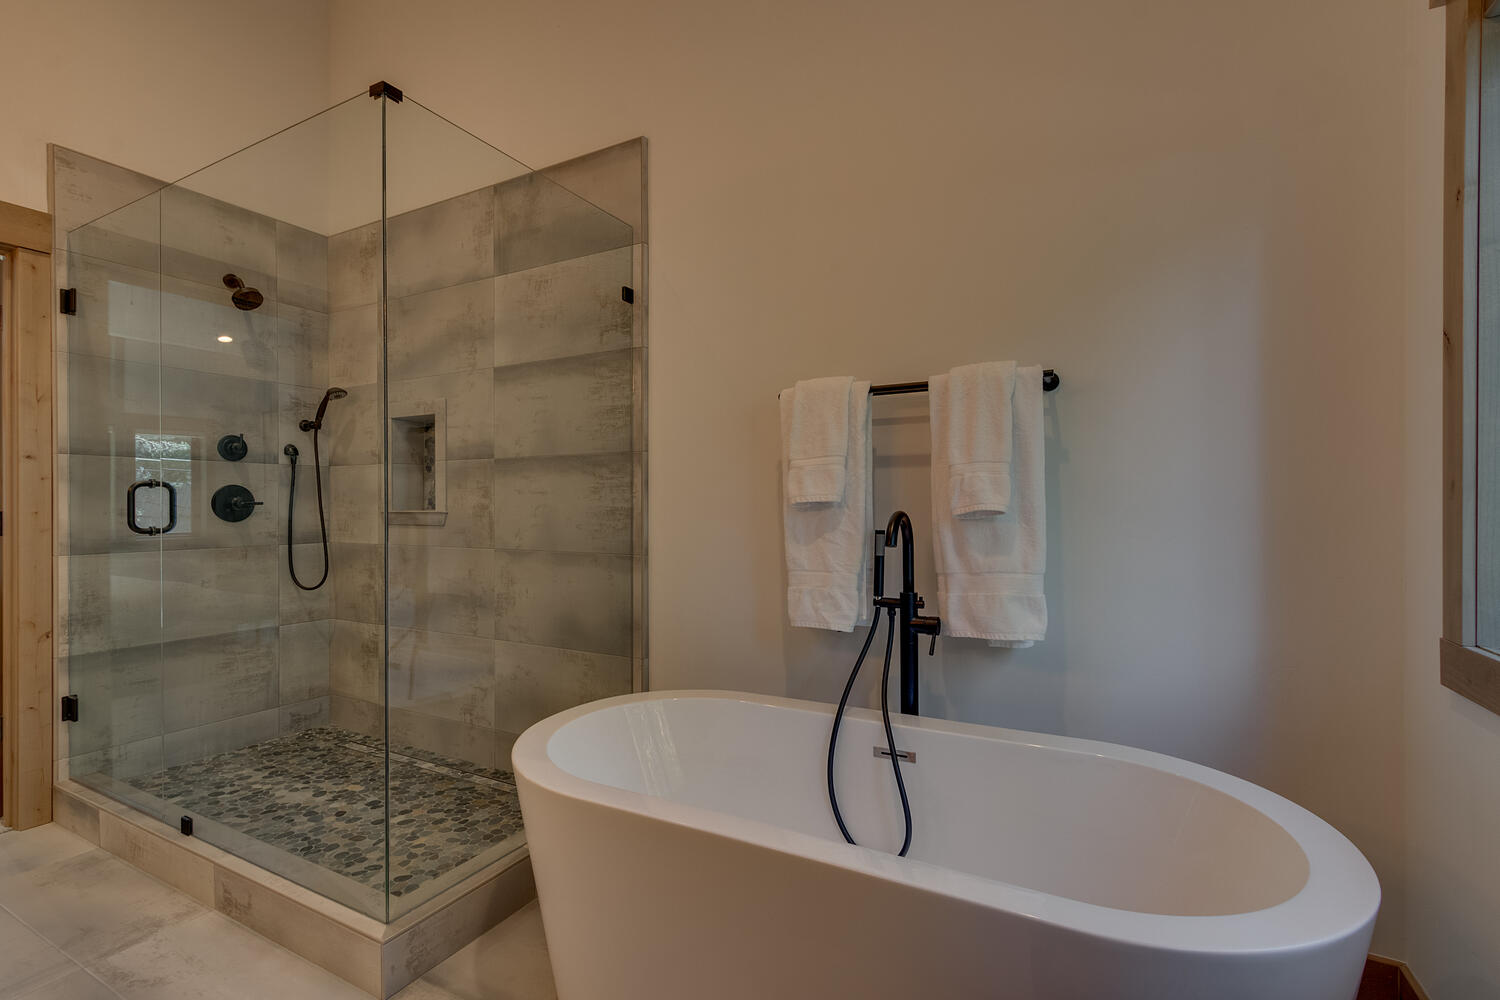 Bathroom with soaker tub and glass enclosed shower